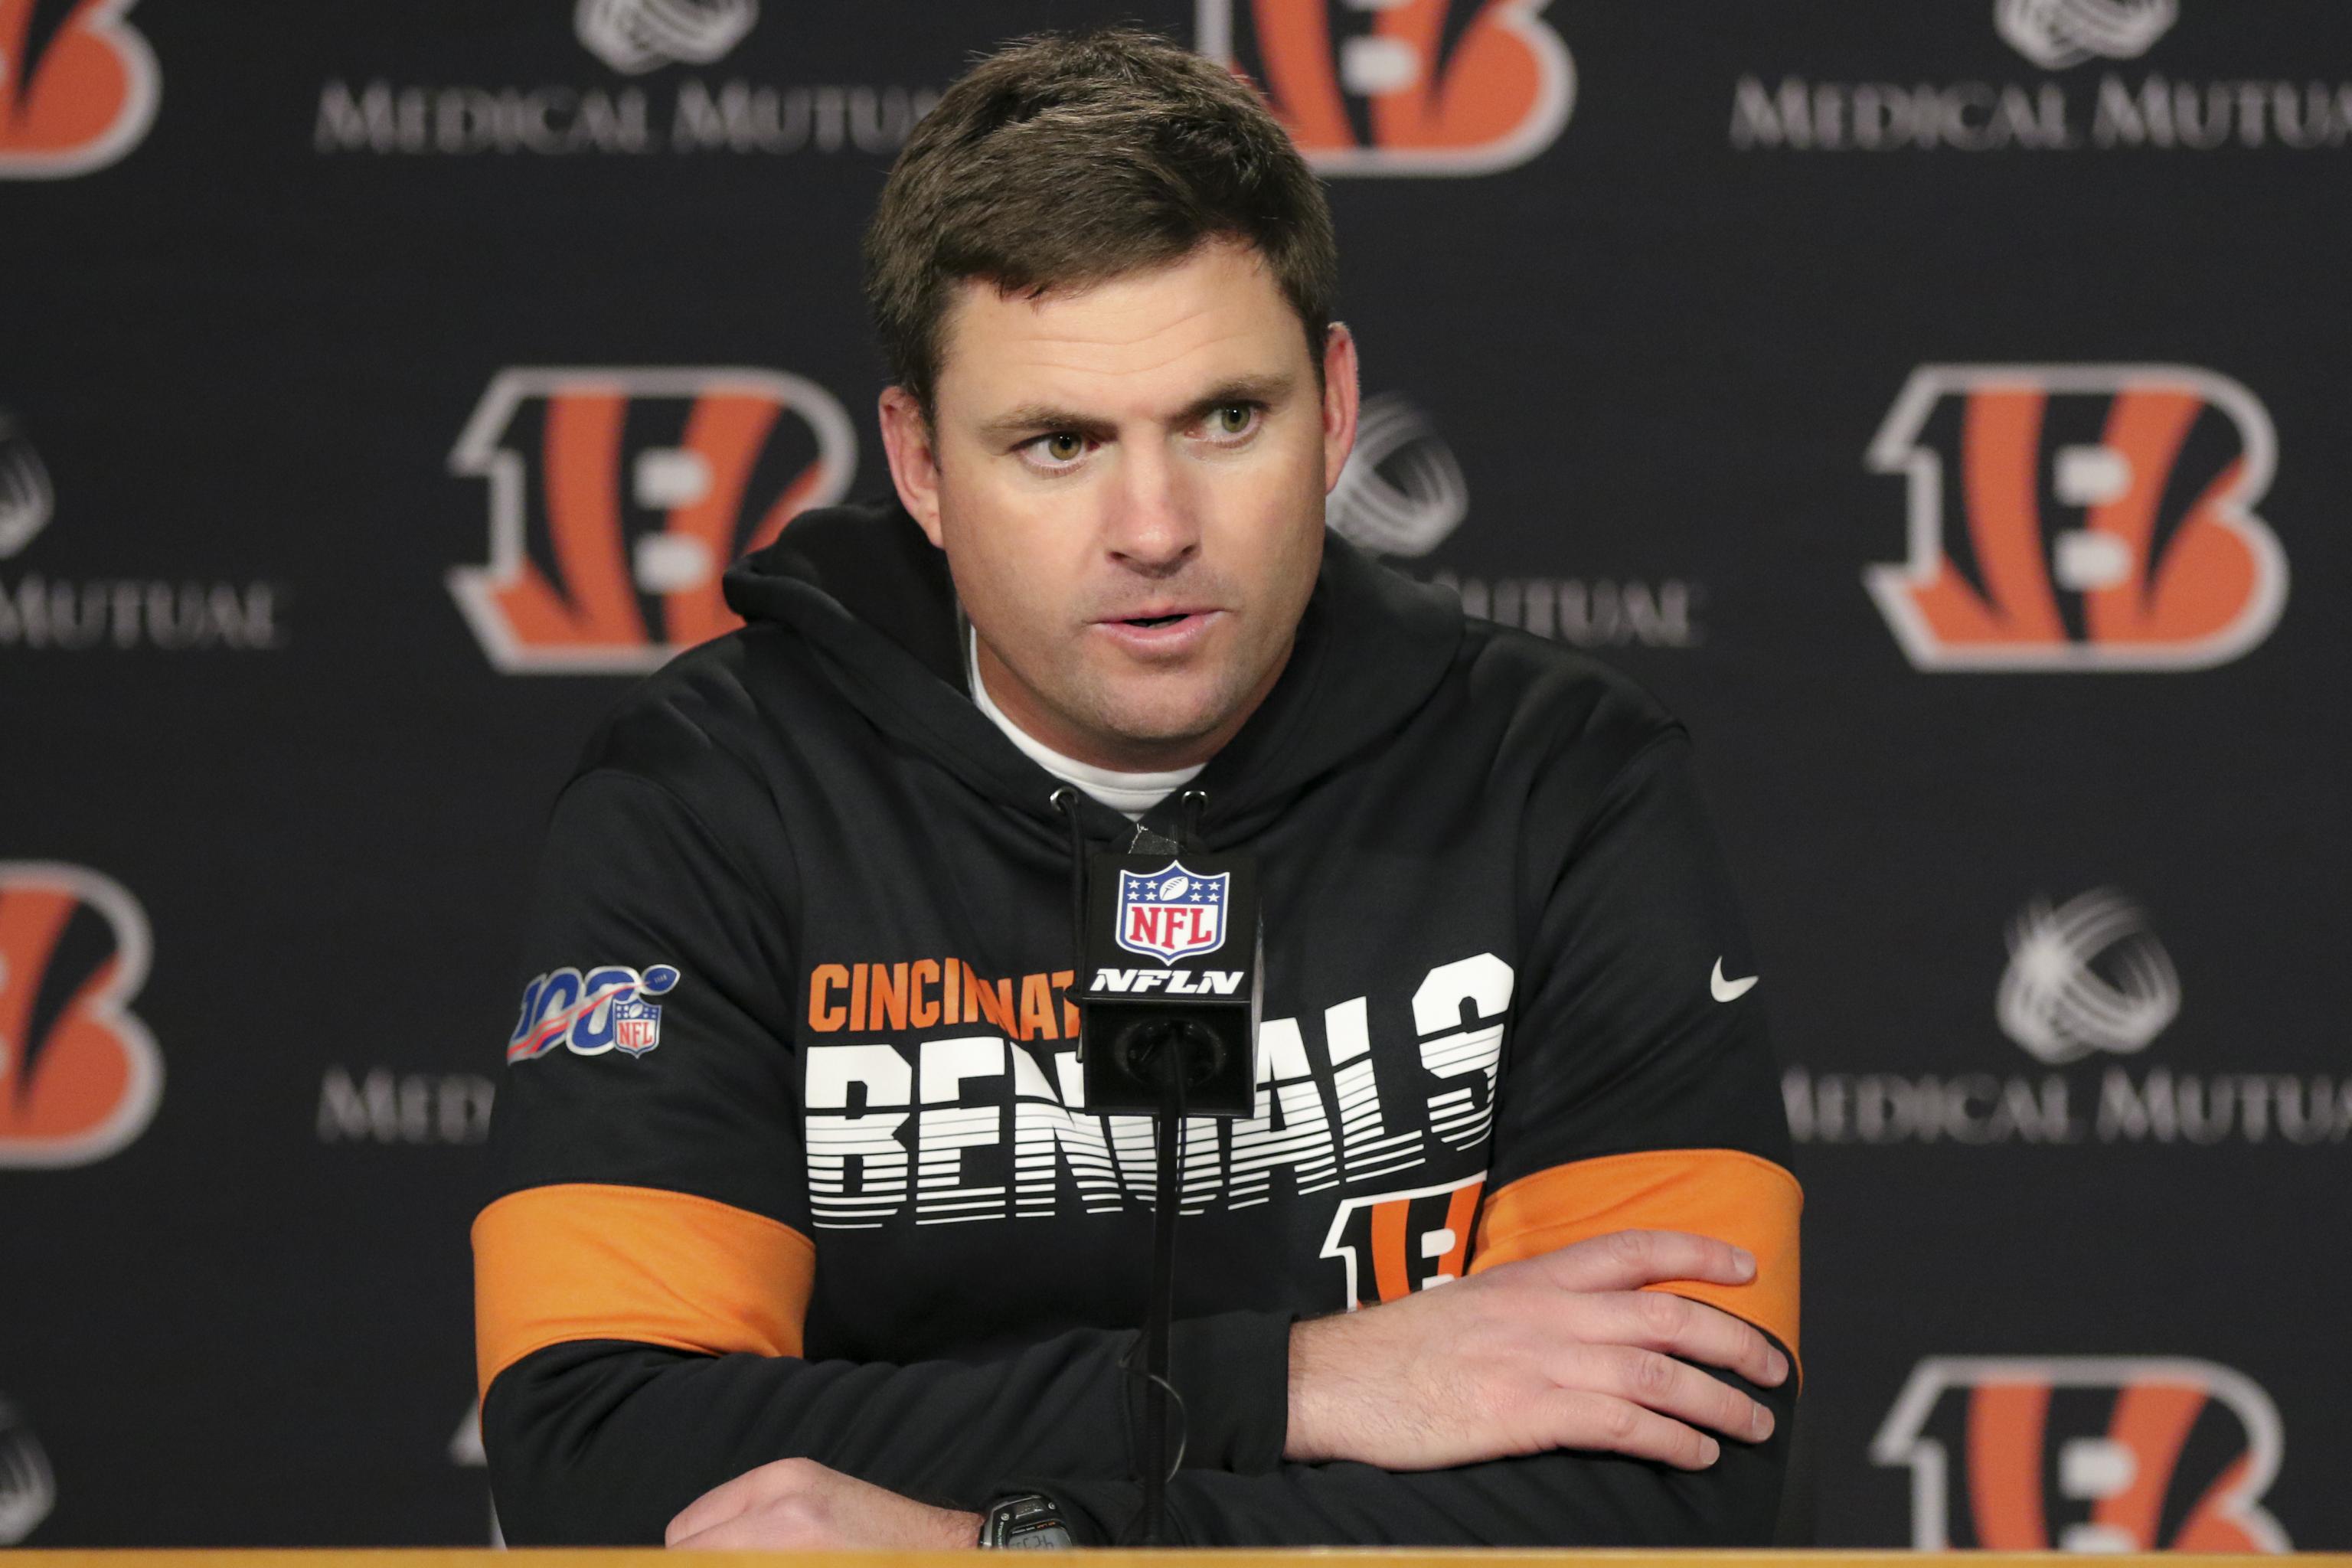 Zac Taylor Will Return as Bengals Coach Despite 4111 Record During